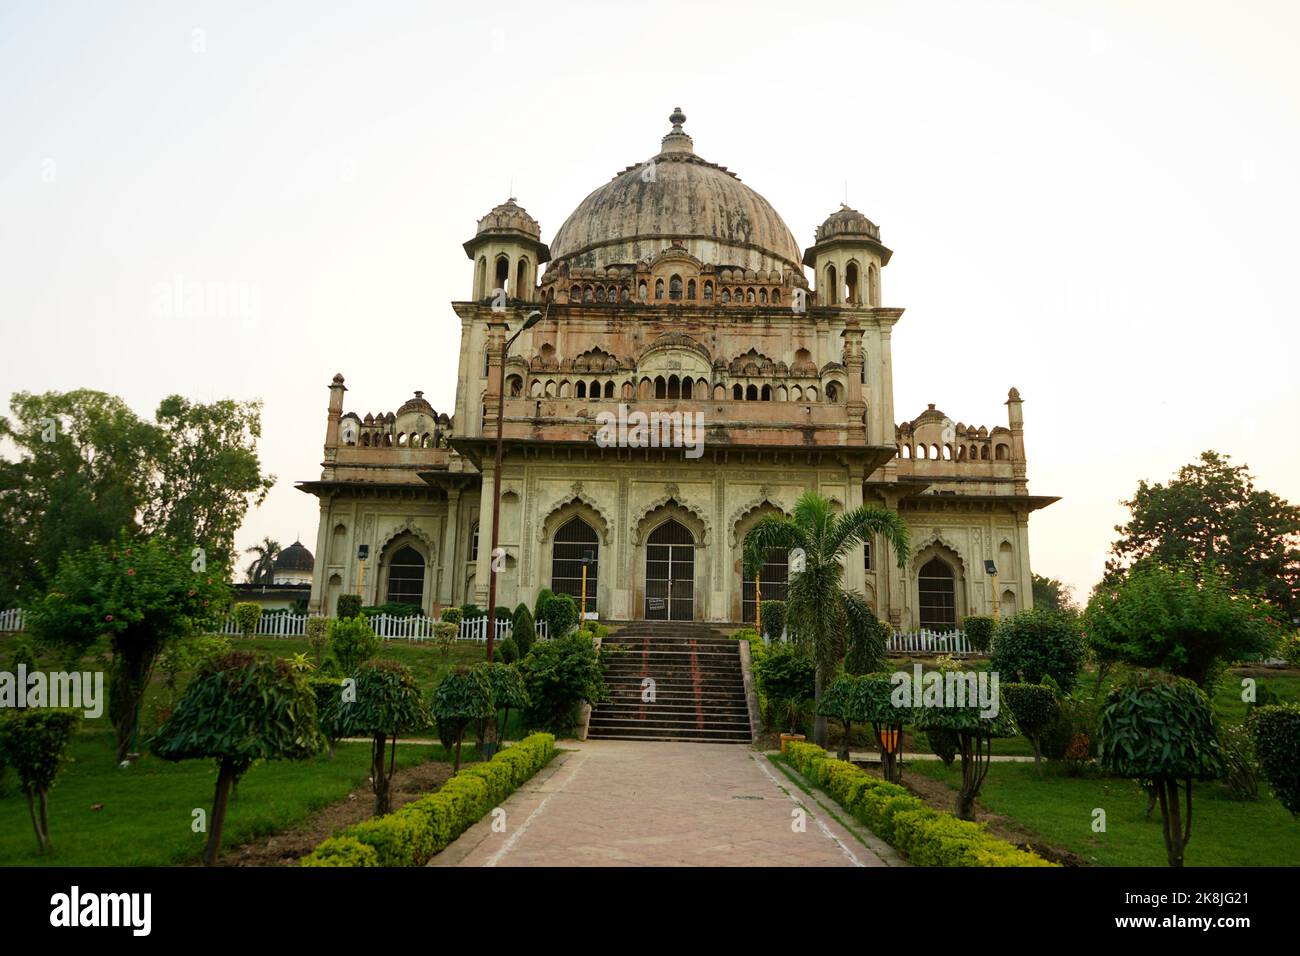 The Tomb of Saadat Ali and it's entrance gate in Lucknow city, India. Stock Photo